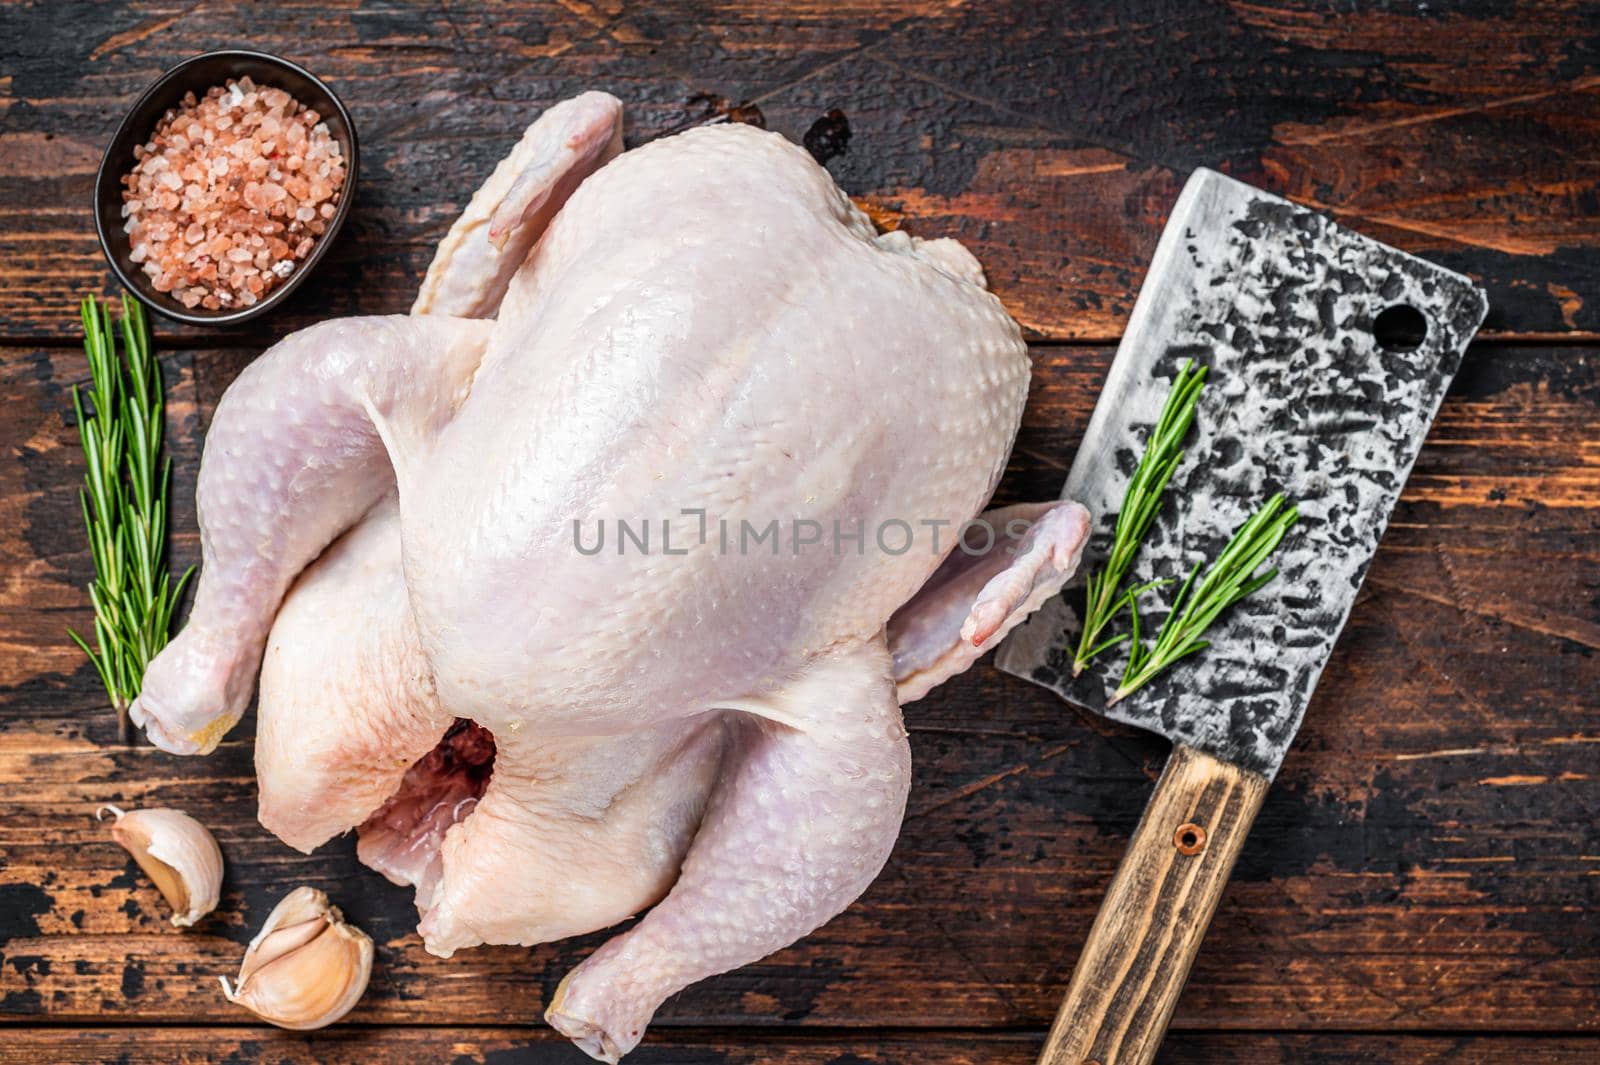 Whole chicken, raw poultry on a butchery table with meat cleaver. Dark Wooden background. Top view by Composter